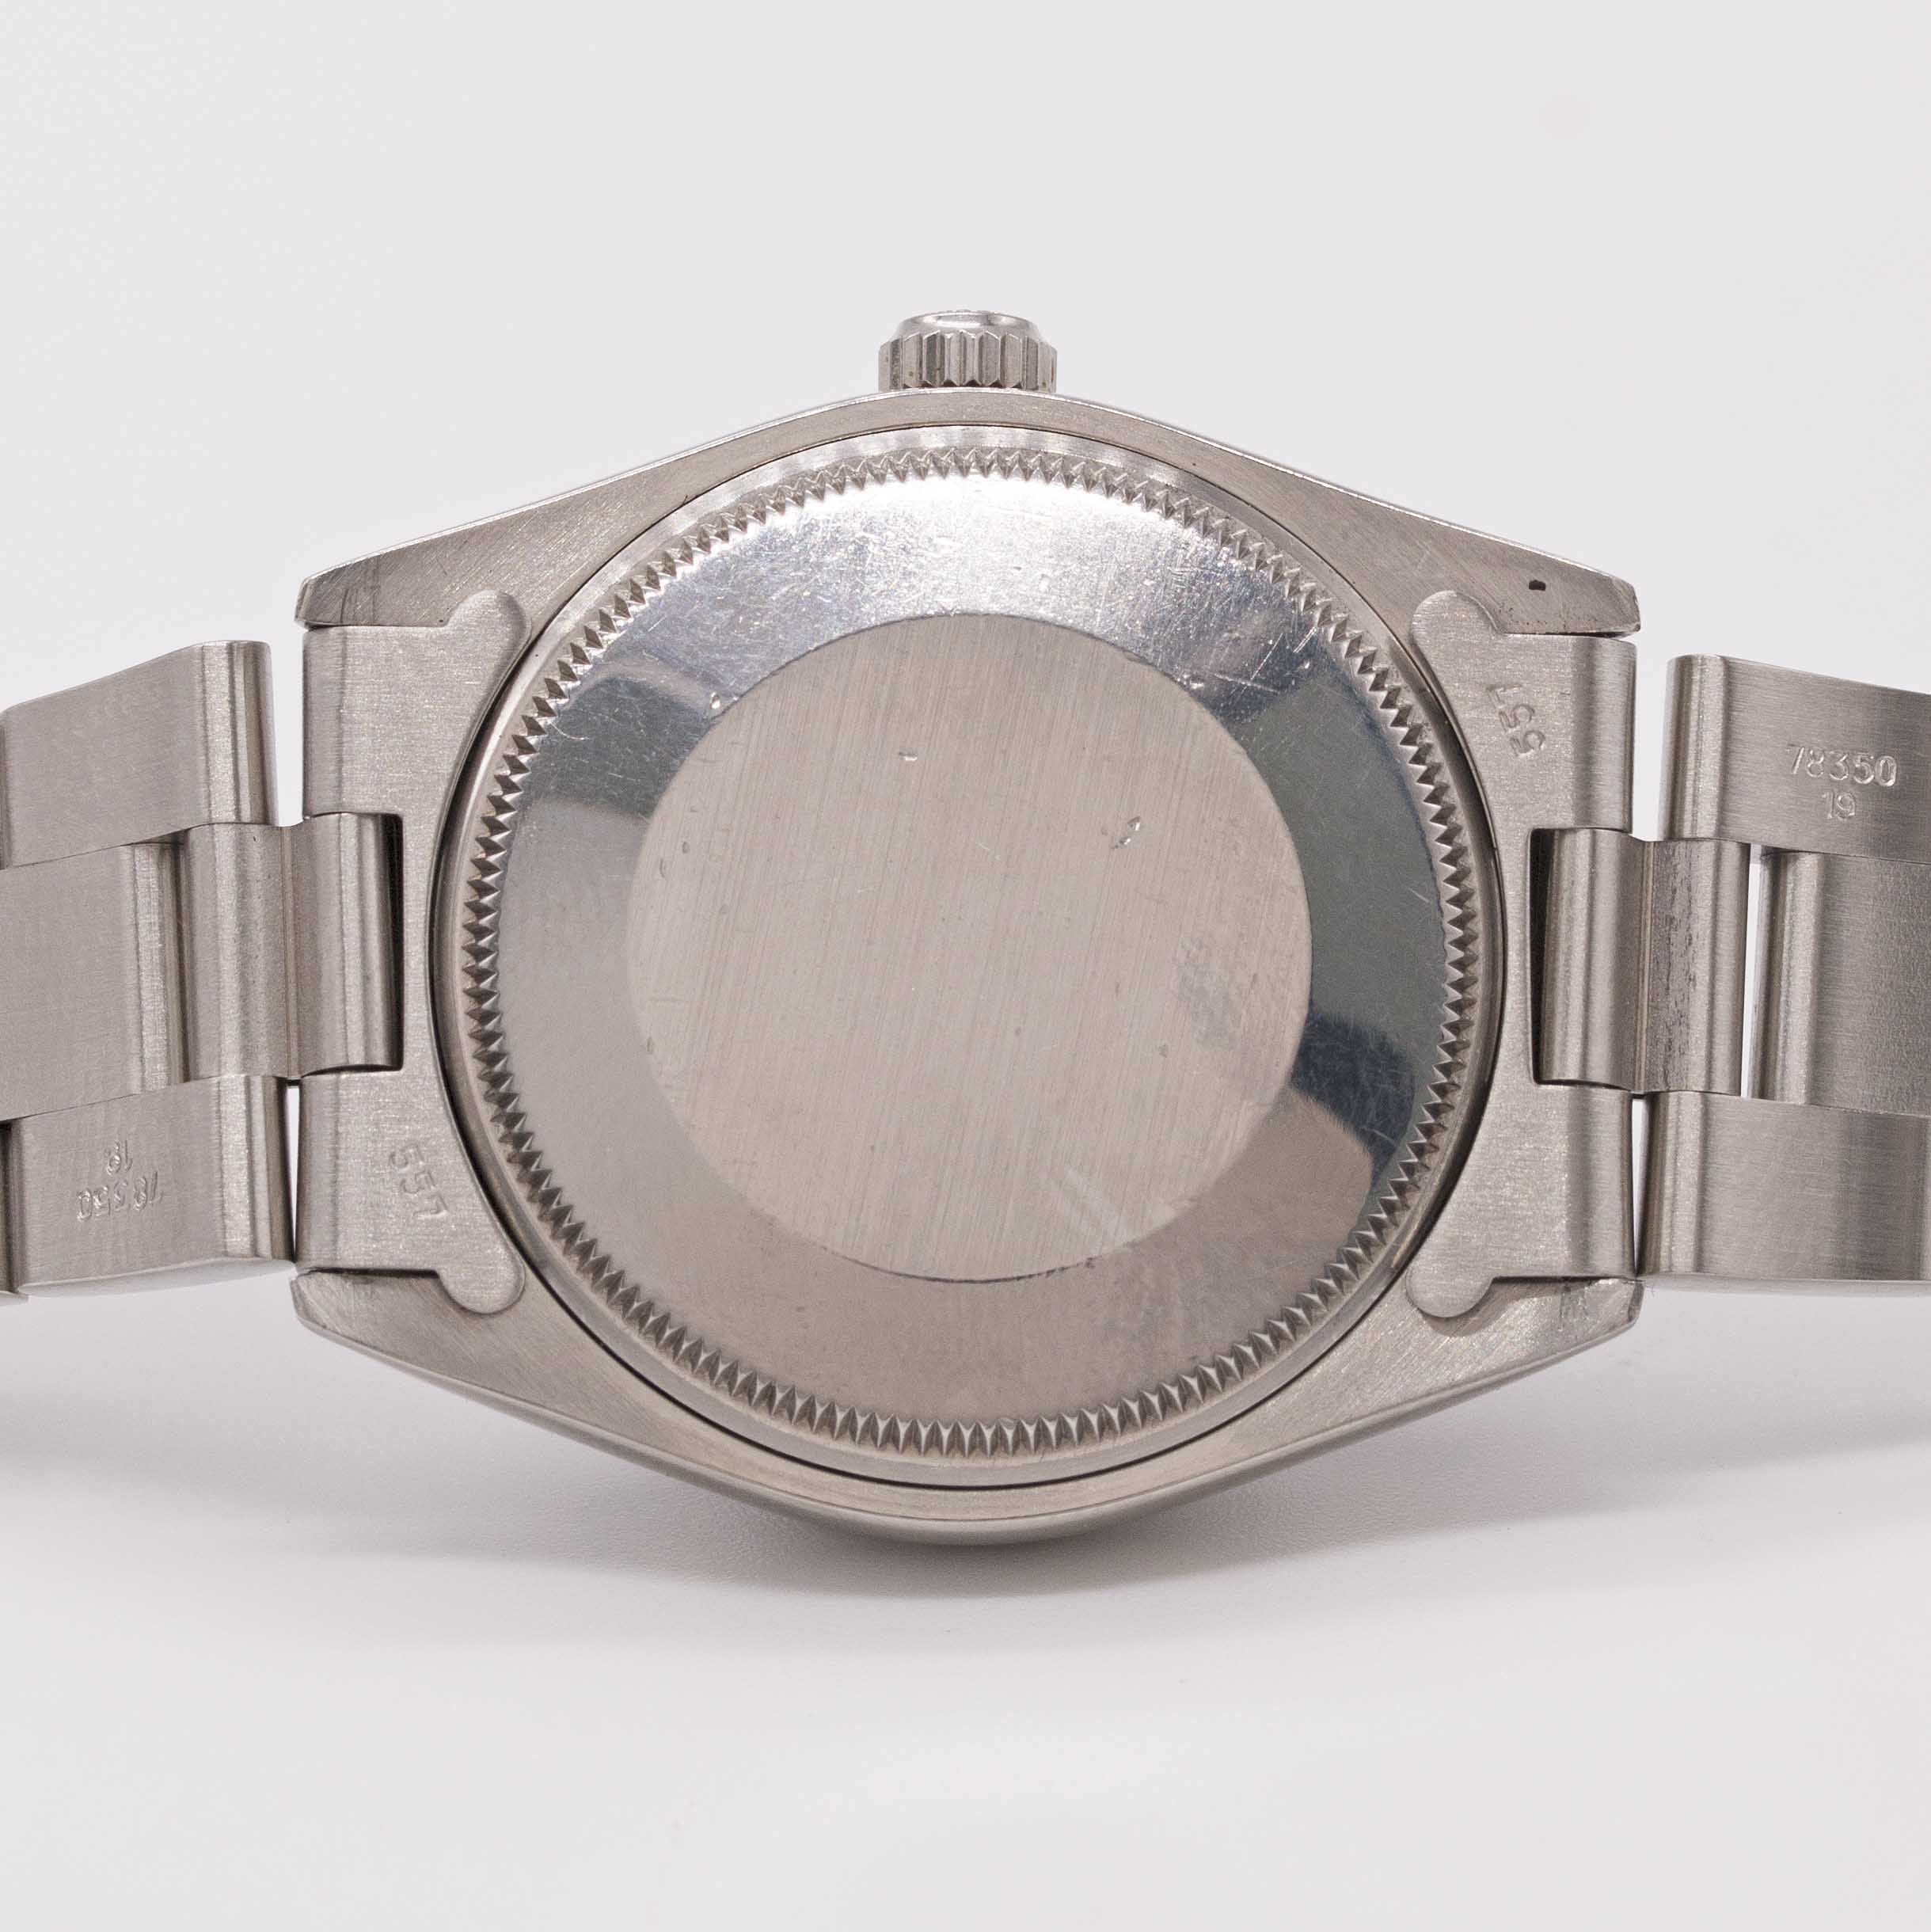 A GENTLEMAN'S STAINLESS STEEL ROLEX OYSTER PERPETUAL AIR KING BRACELET WATCH CIRCA 1987, REF. 5500 R - Image 6 of 9